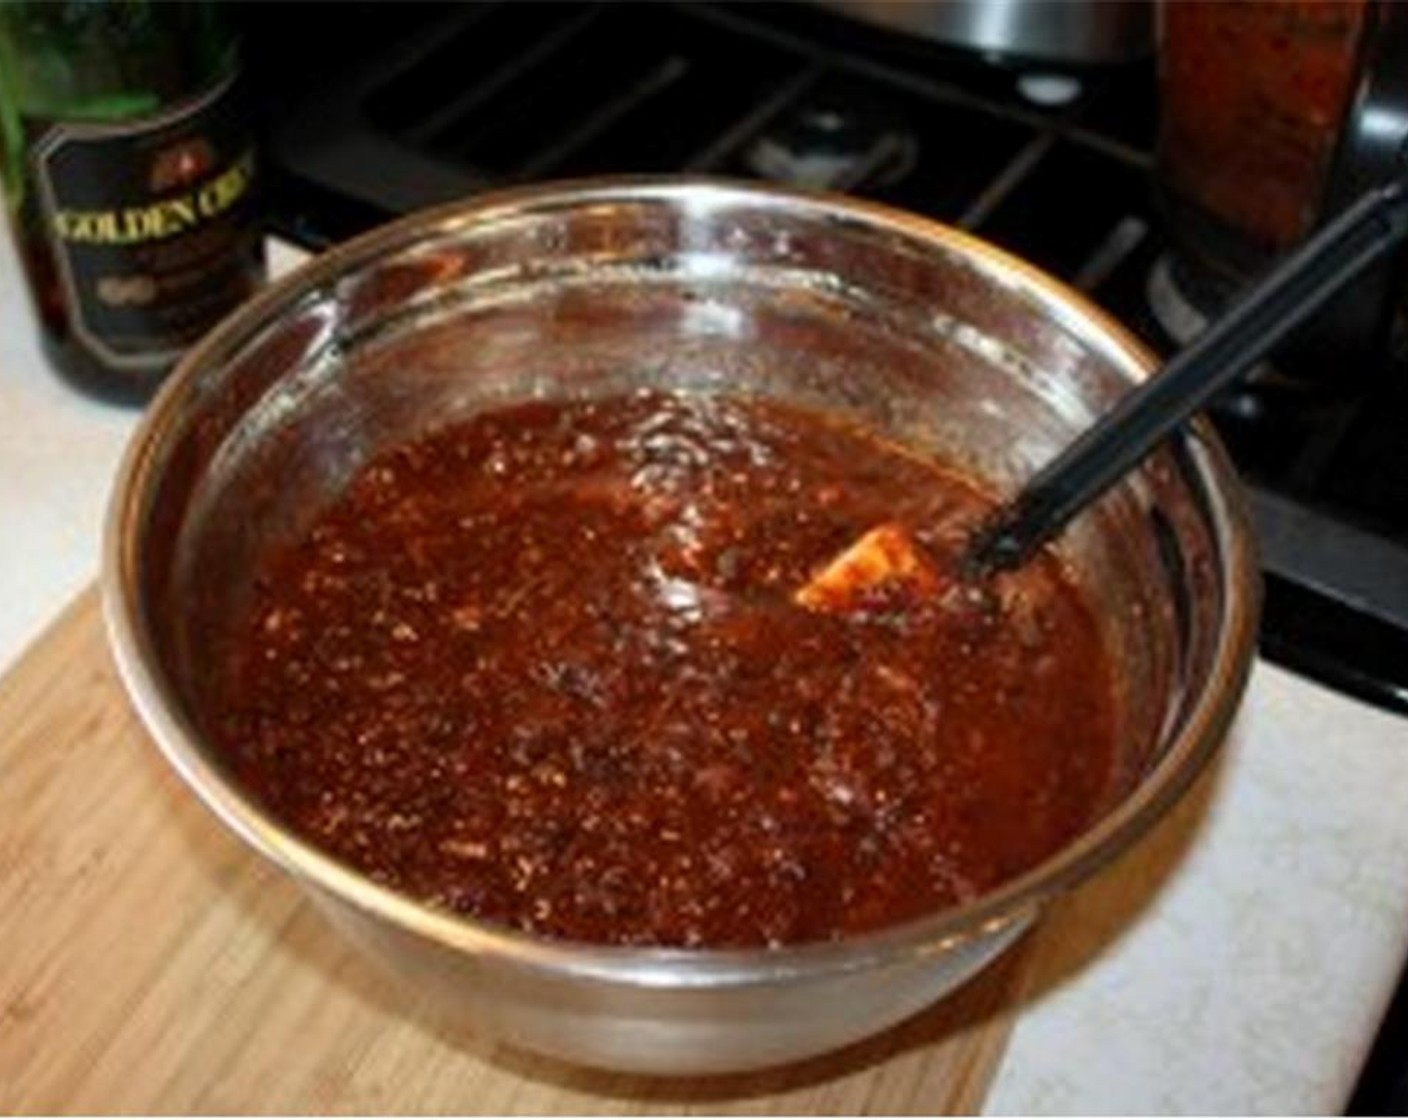 step 3 Pour the entire mixture into a large bowl and add the Dark Spiced Rum (2 cups) and sherry mixture.